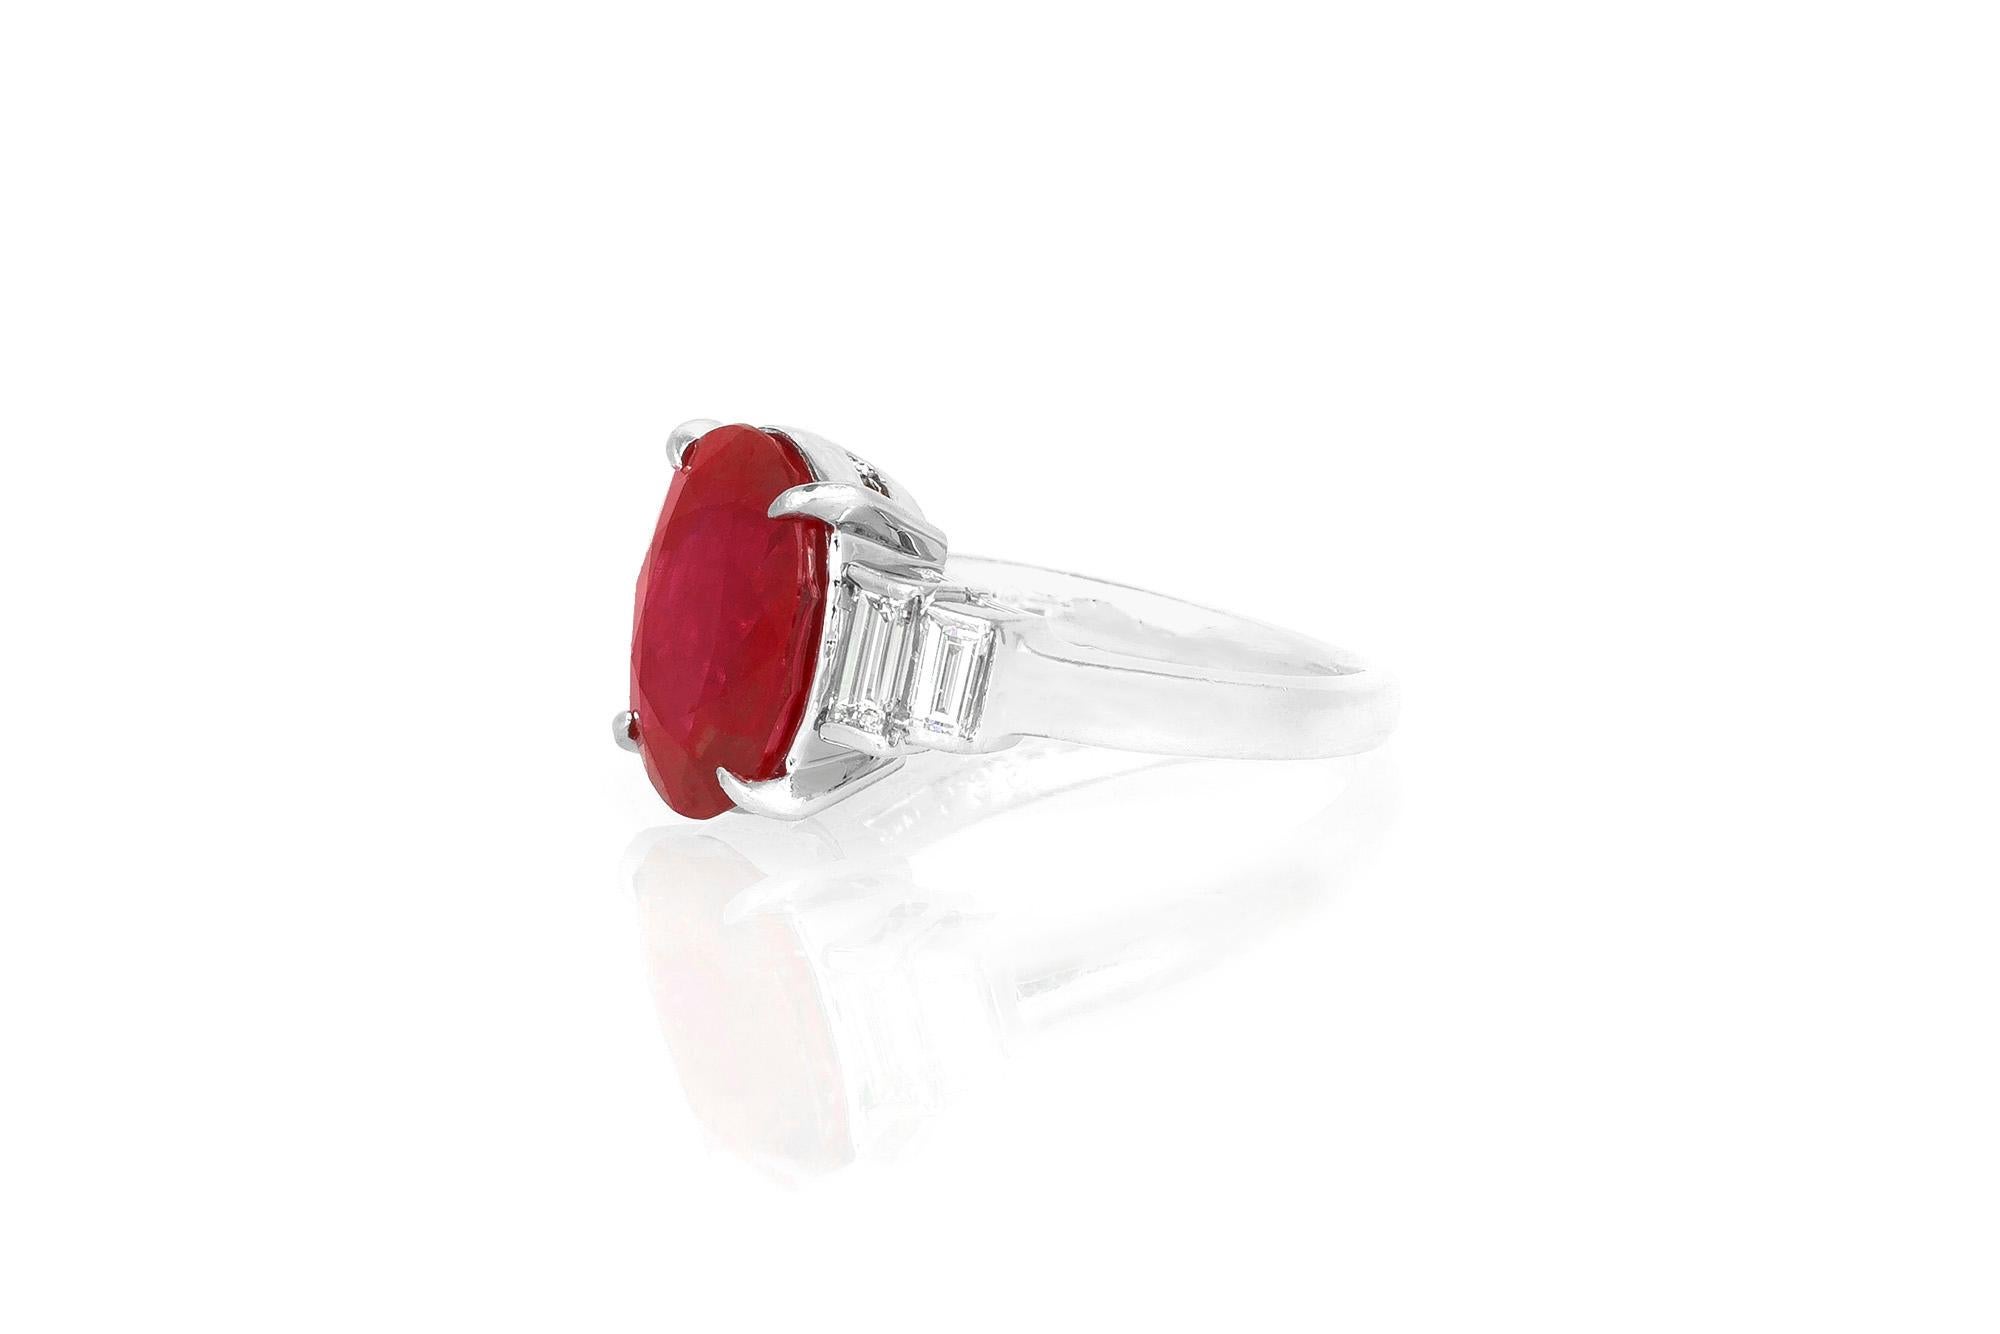 Finely crafted in platinum with a 5.39 carat Burma origin Ruby as the center stone. The ring features 4 Baguette-cut diamonds on the side weighing approximately a total of 0.50 carats.
Size 5 3/4, resizable